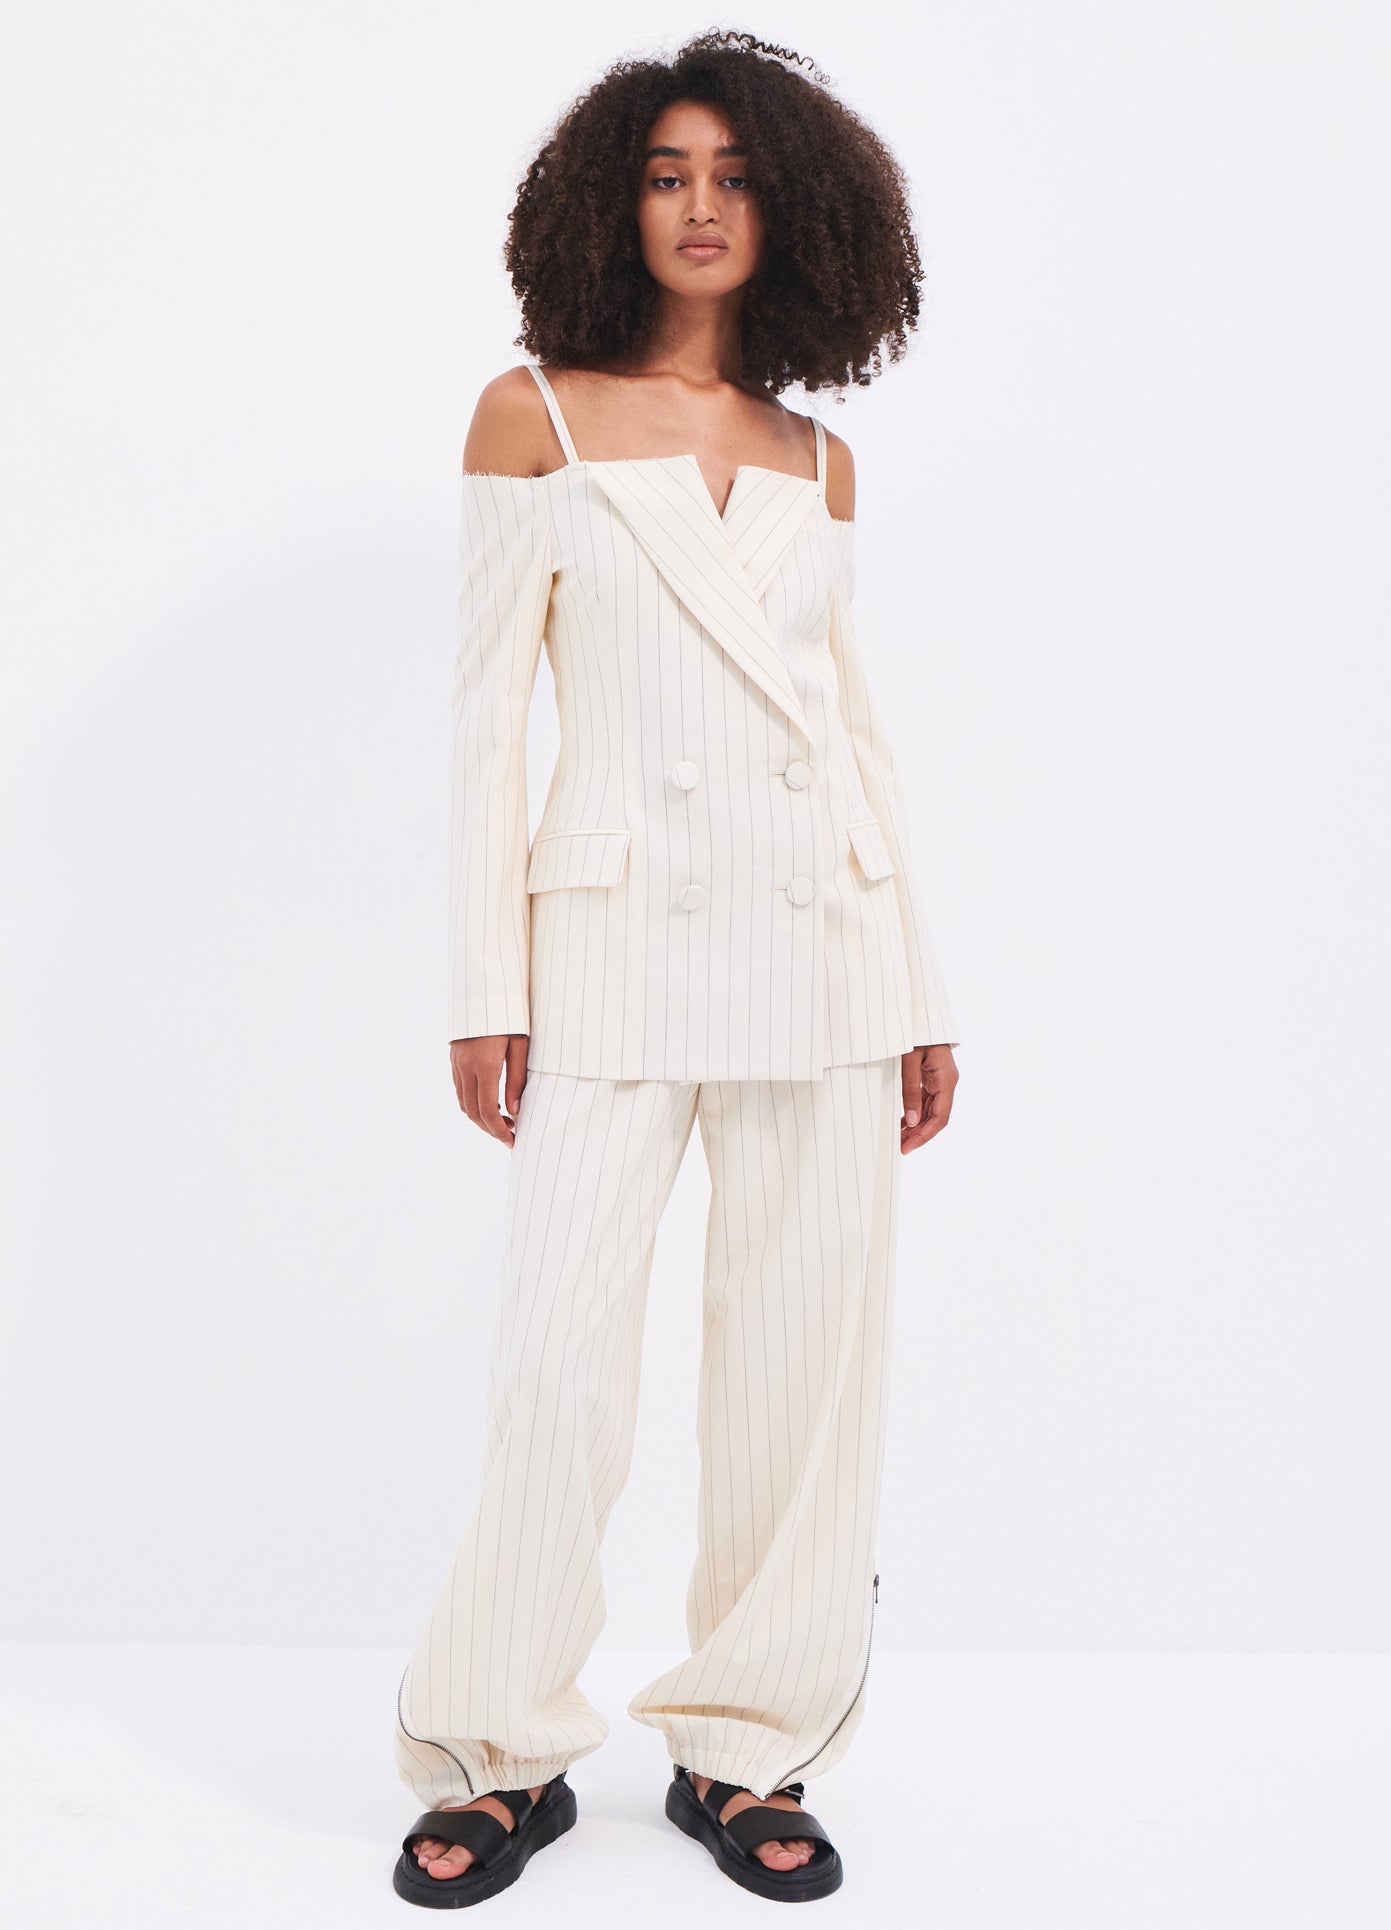 MONSE Off The Shoulder Pinstripe Blazer in Ivory on model full front view